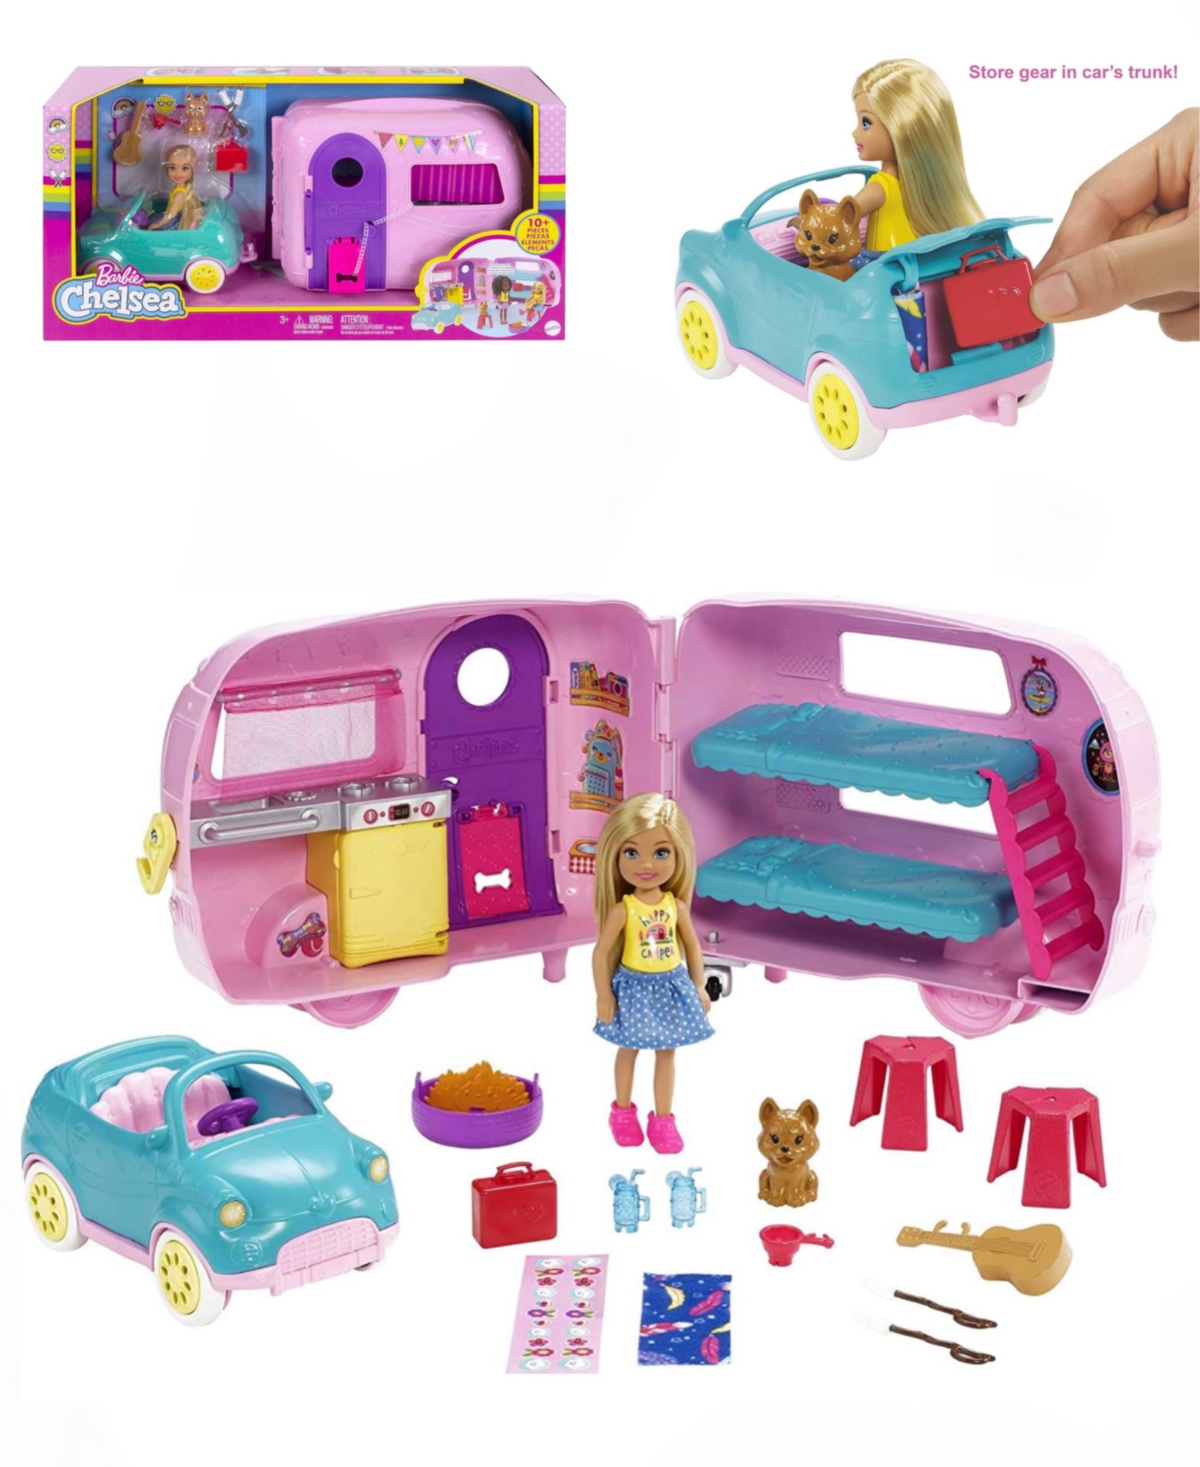 Barbie Toys, Playset with Chelsea Doll, Toy Accessories & Reviews - All Toys - Macy's